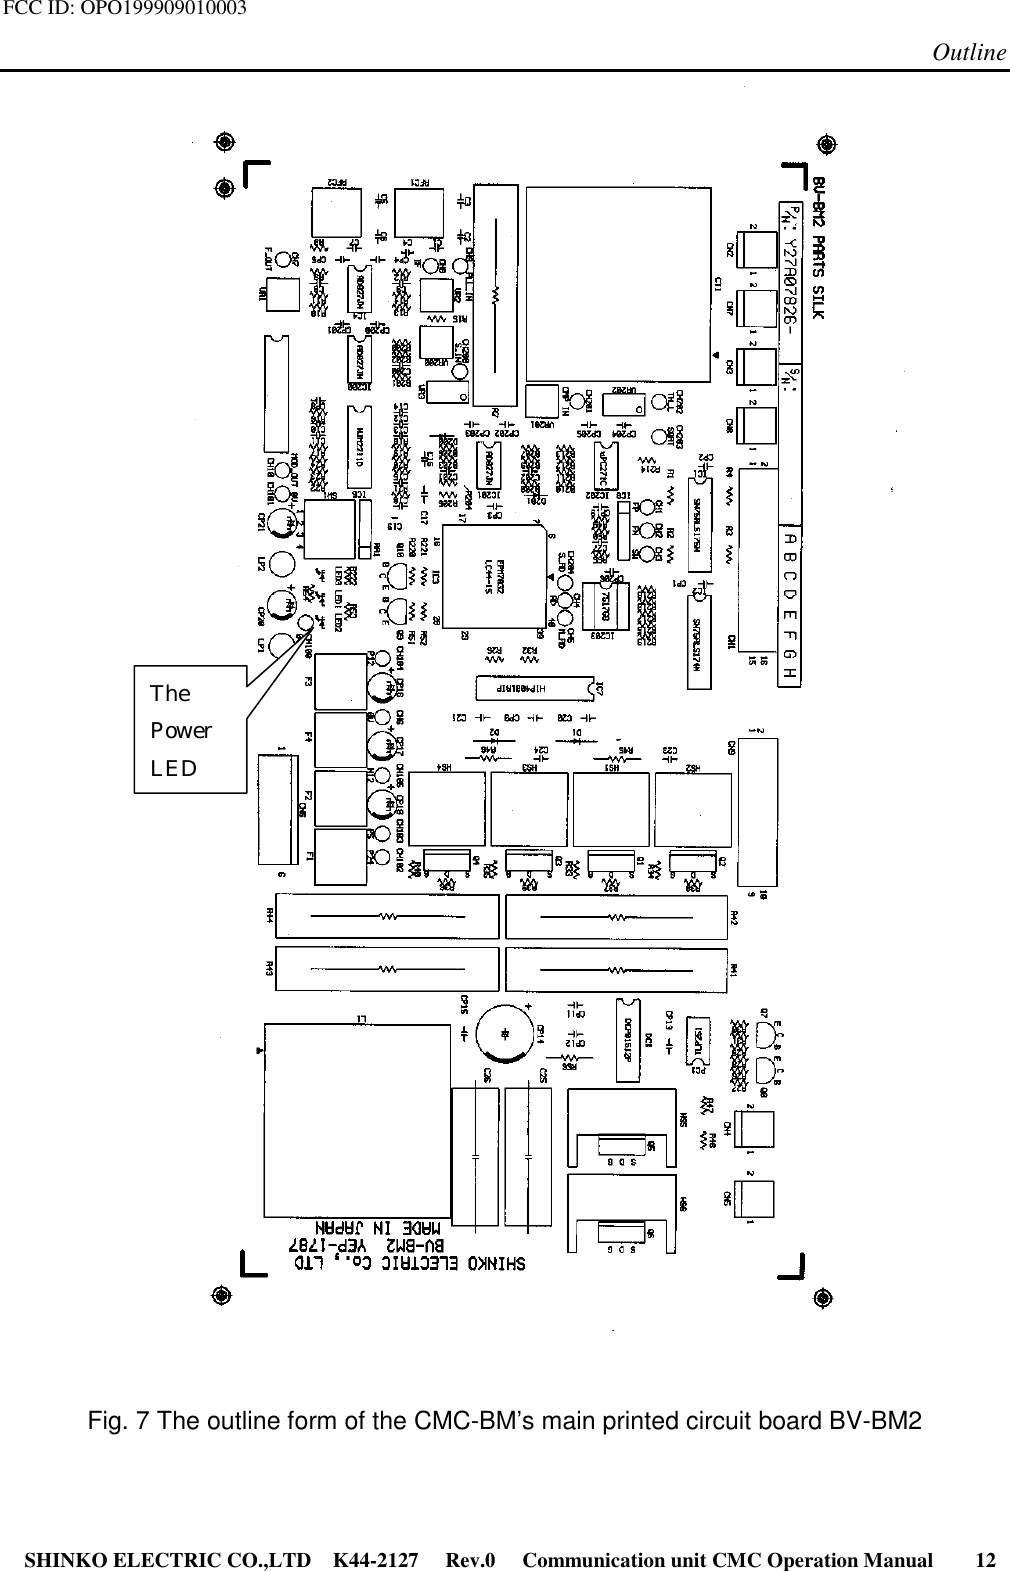 FCC ID: OPO199909010003Outline SHINKO ELECTRIC CO.,LTD K44-2127   Rev.0   Communication unit CMC Operation Manual     12Fig. 7 The outline form of the CMC-BM’s main printed circuit board BV-BM2ThePowerLED